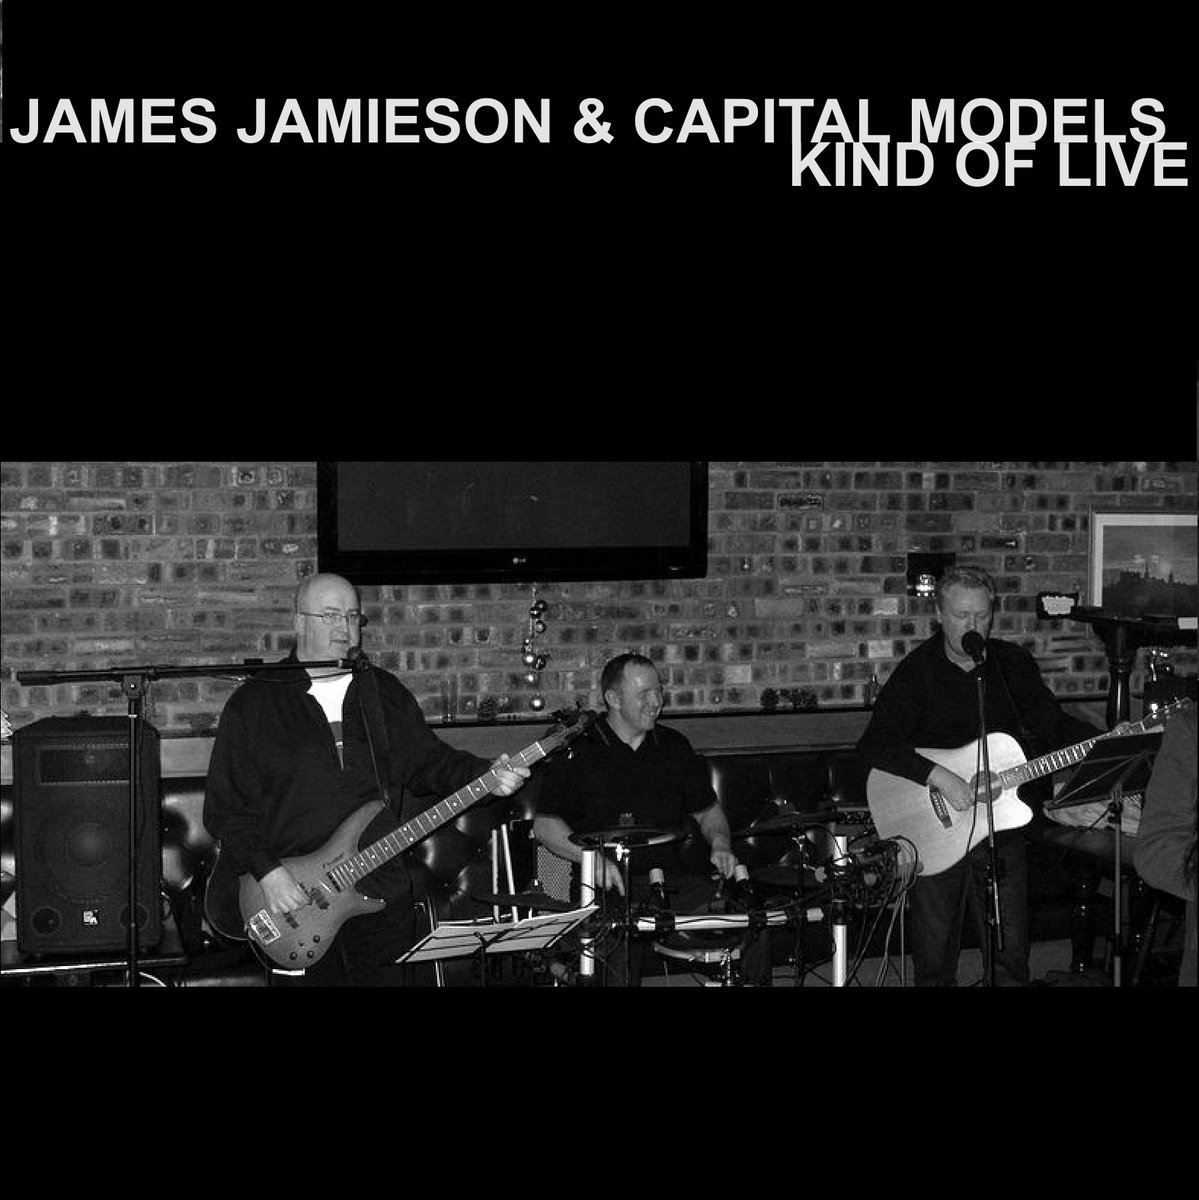 This morning I've been mostly preparing 2 sets of 2012 recordings for release on Bandcamp to mark what would have been the 62nd birthday of my old musical cohort Mr Jamie Frain, unbelievably, gone for a decade already. Out Monday on Jamie's Bandcamp Page jamesjamieson.bandcamp.com/music